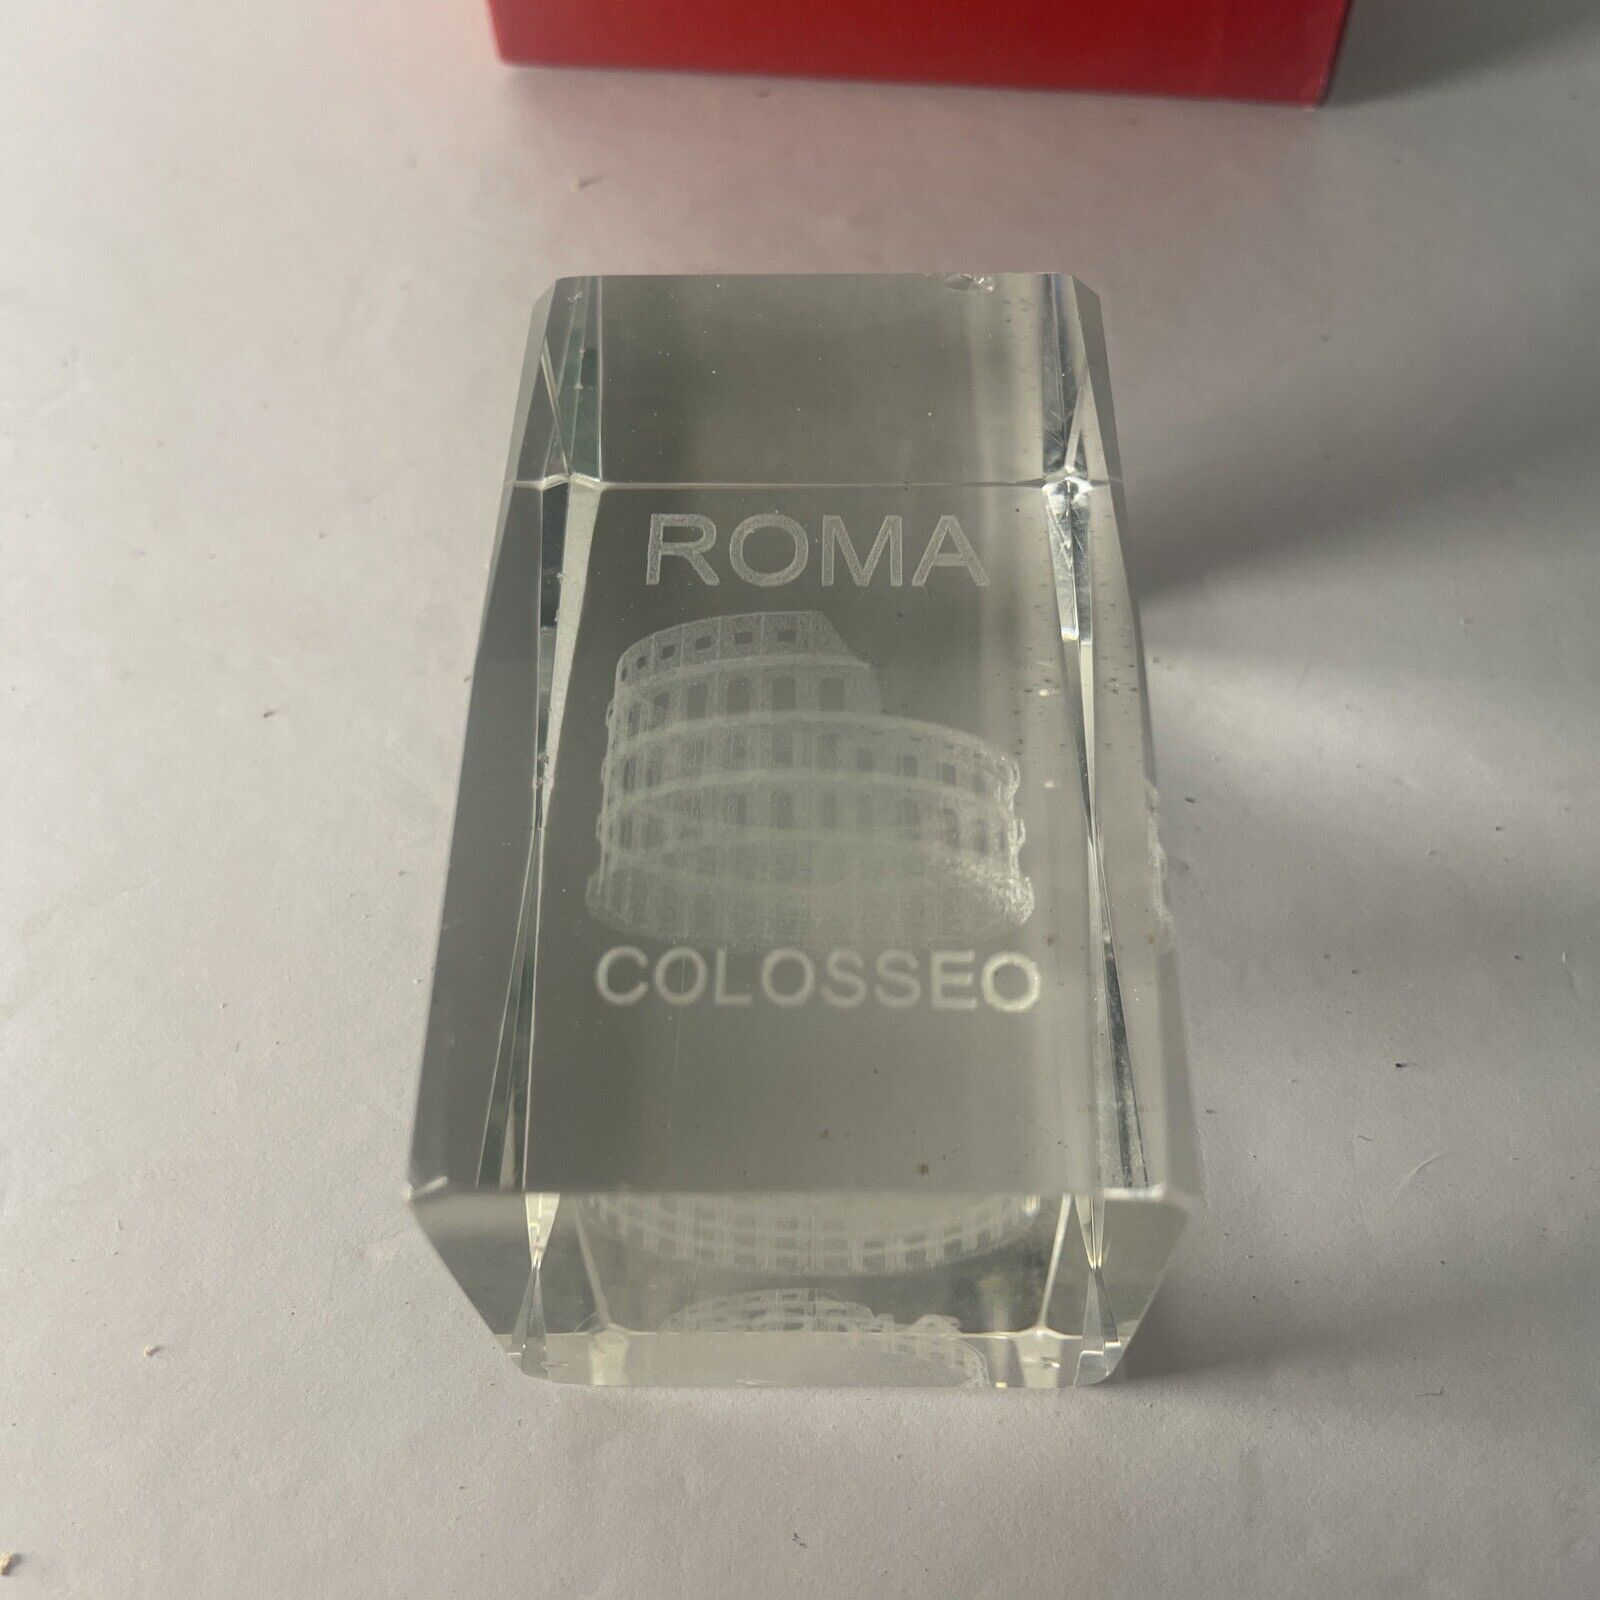 Roma Il Colloseo Roman Colosseum Paperweight 3D Laser Etched Etching Italy Rome